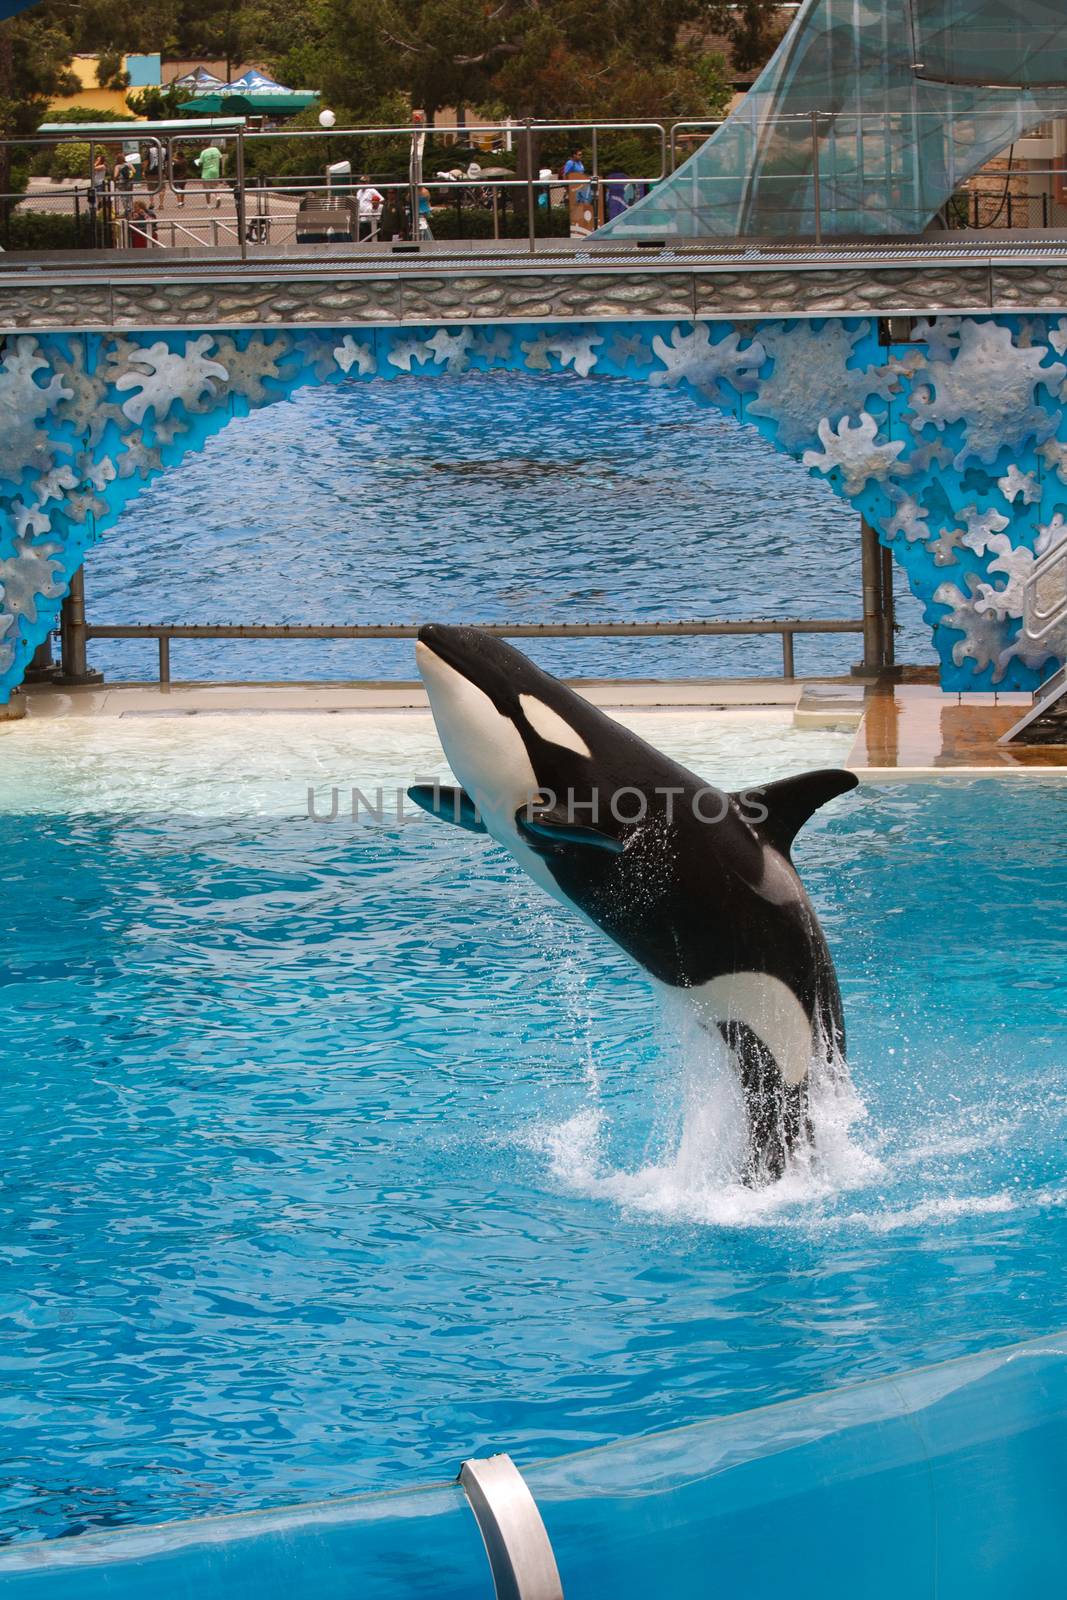 Killer Whale performing at Sea World by Roka